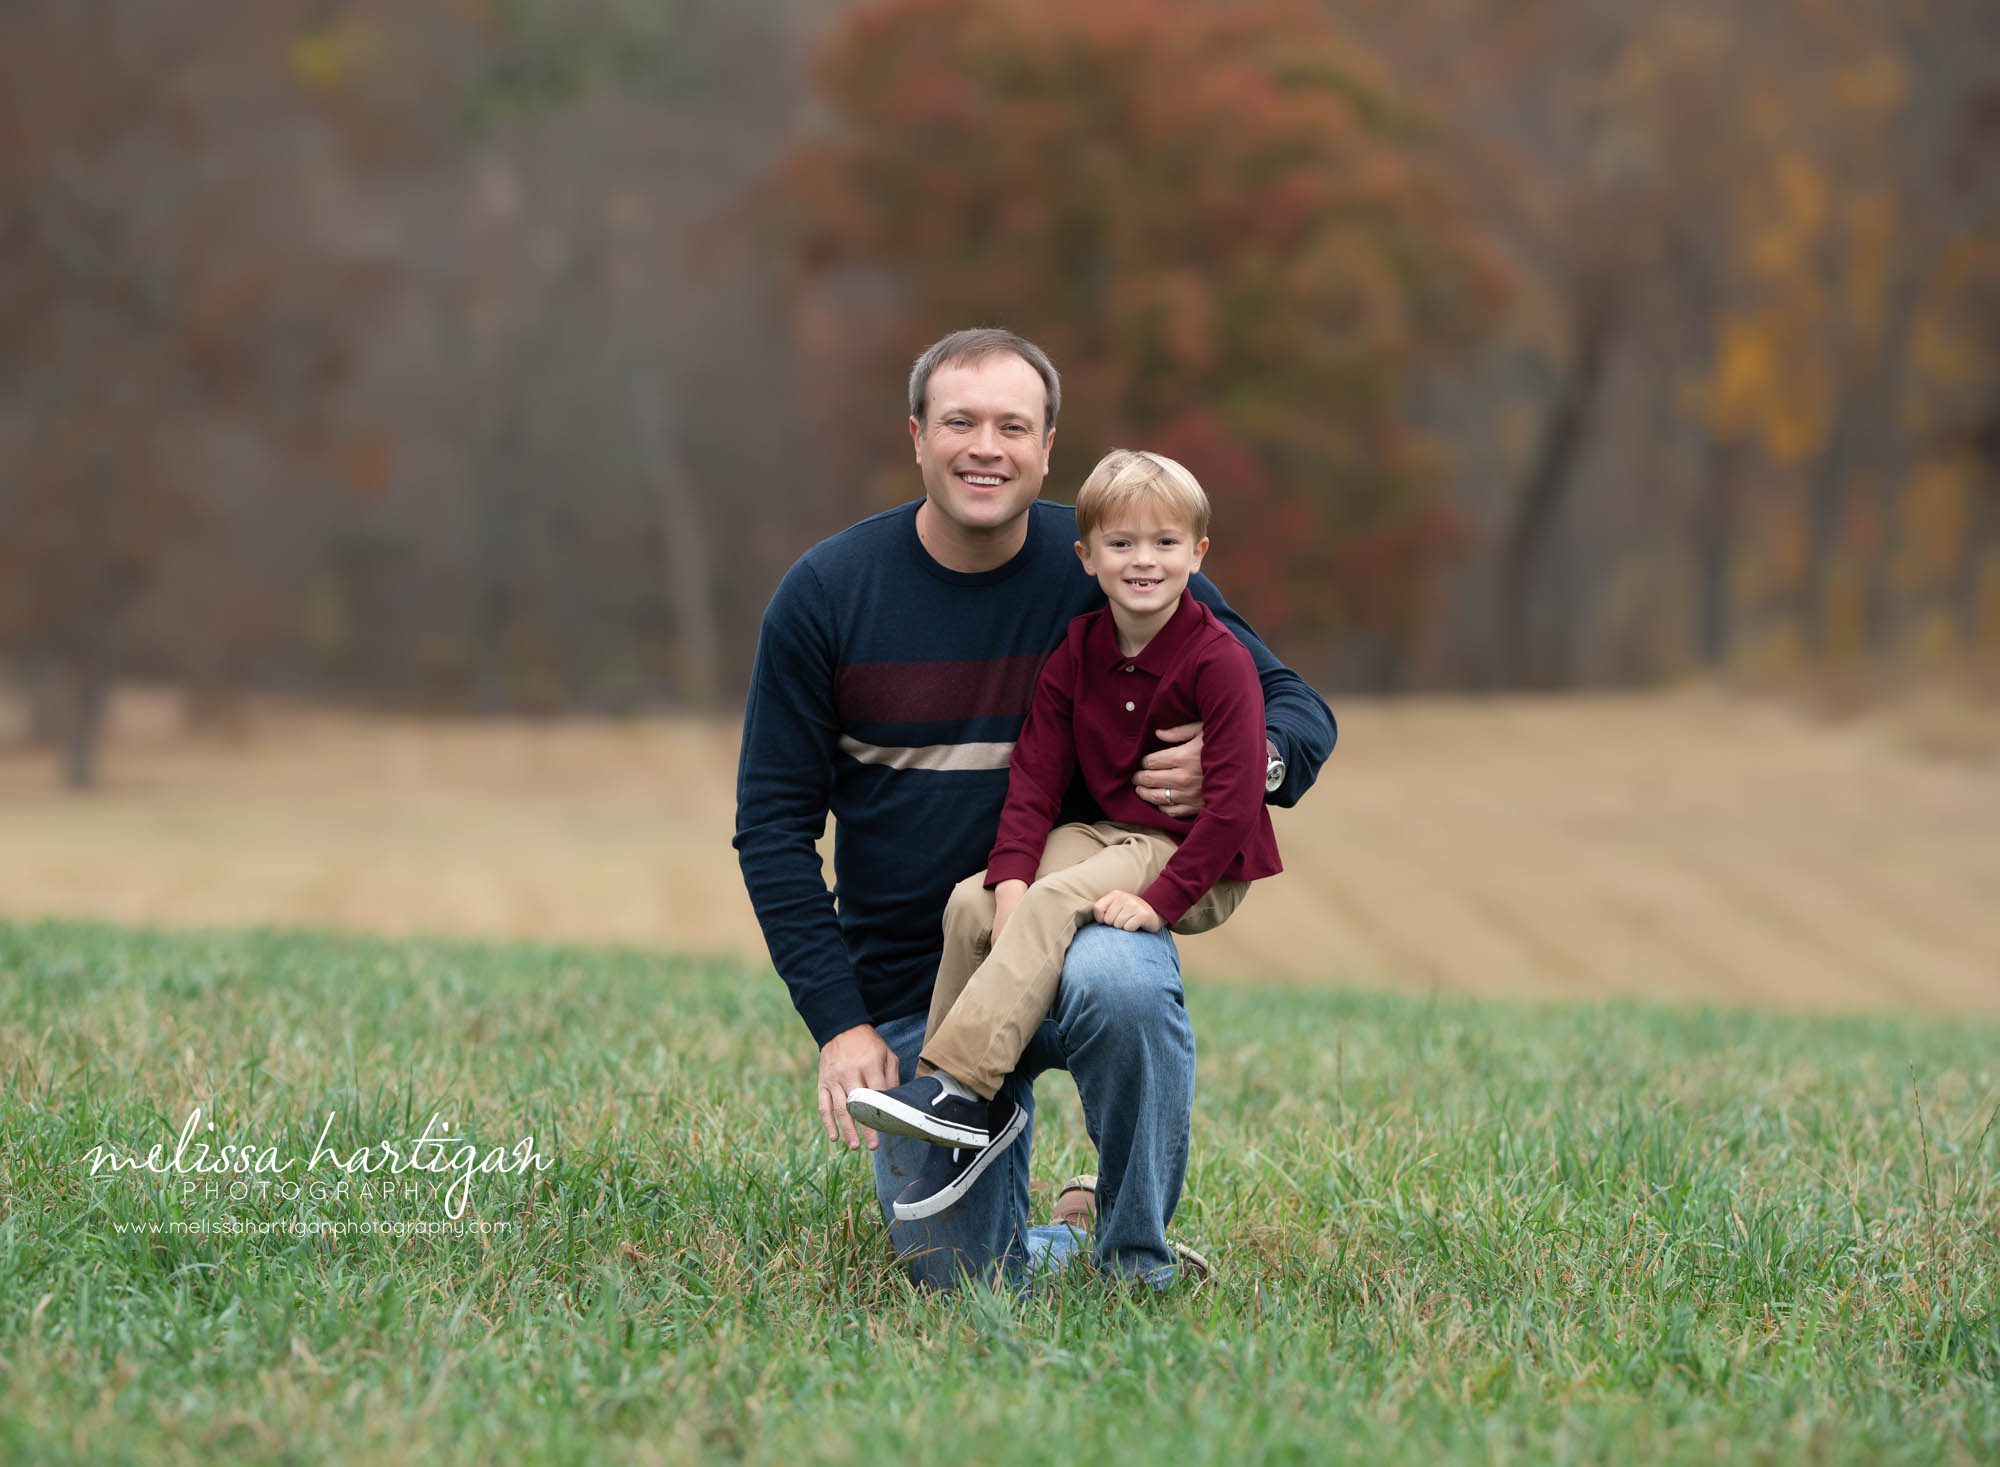 dad with son kneeling family picture pose